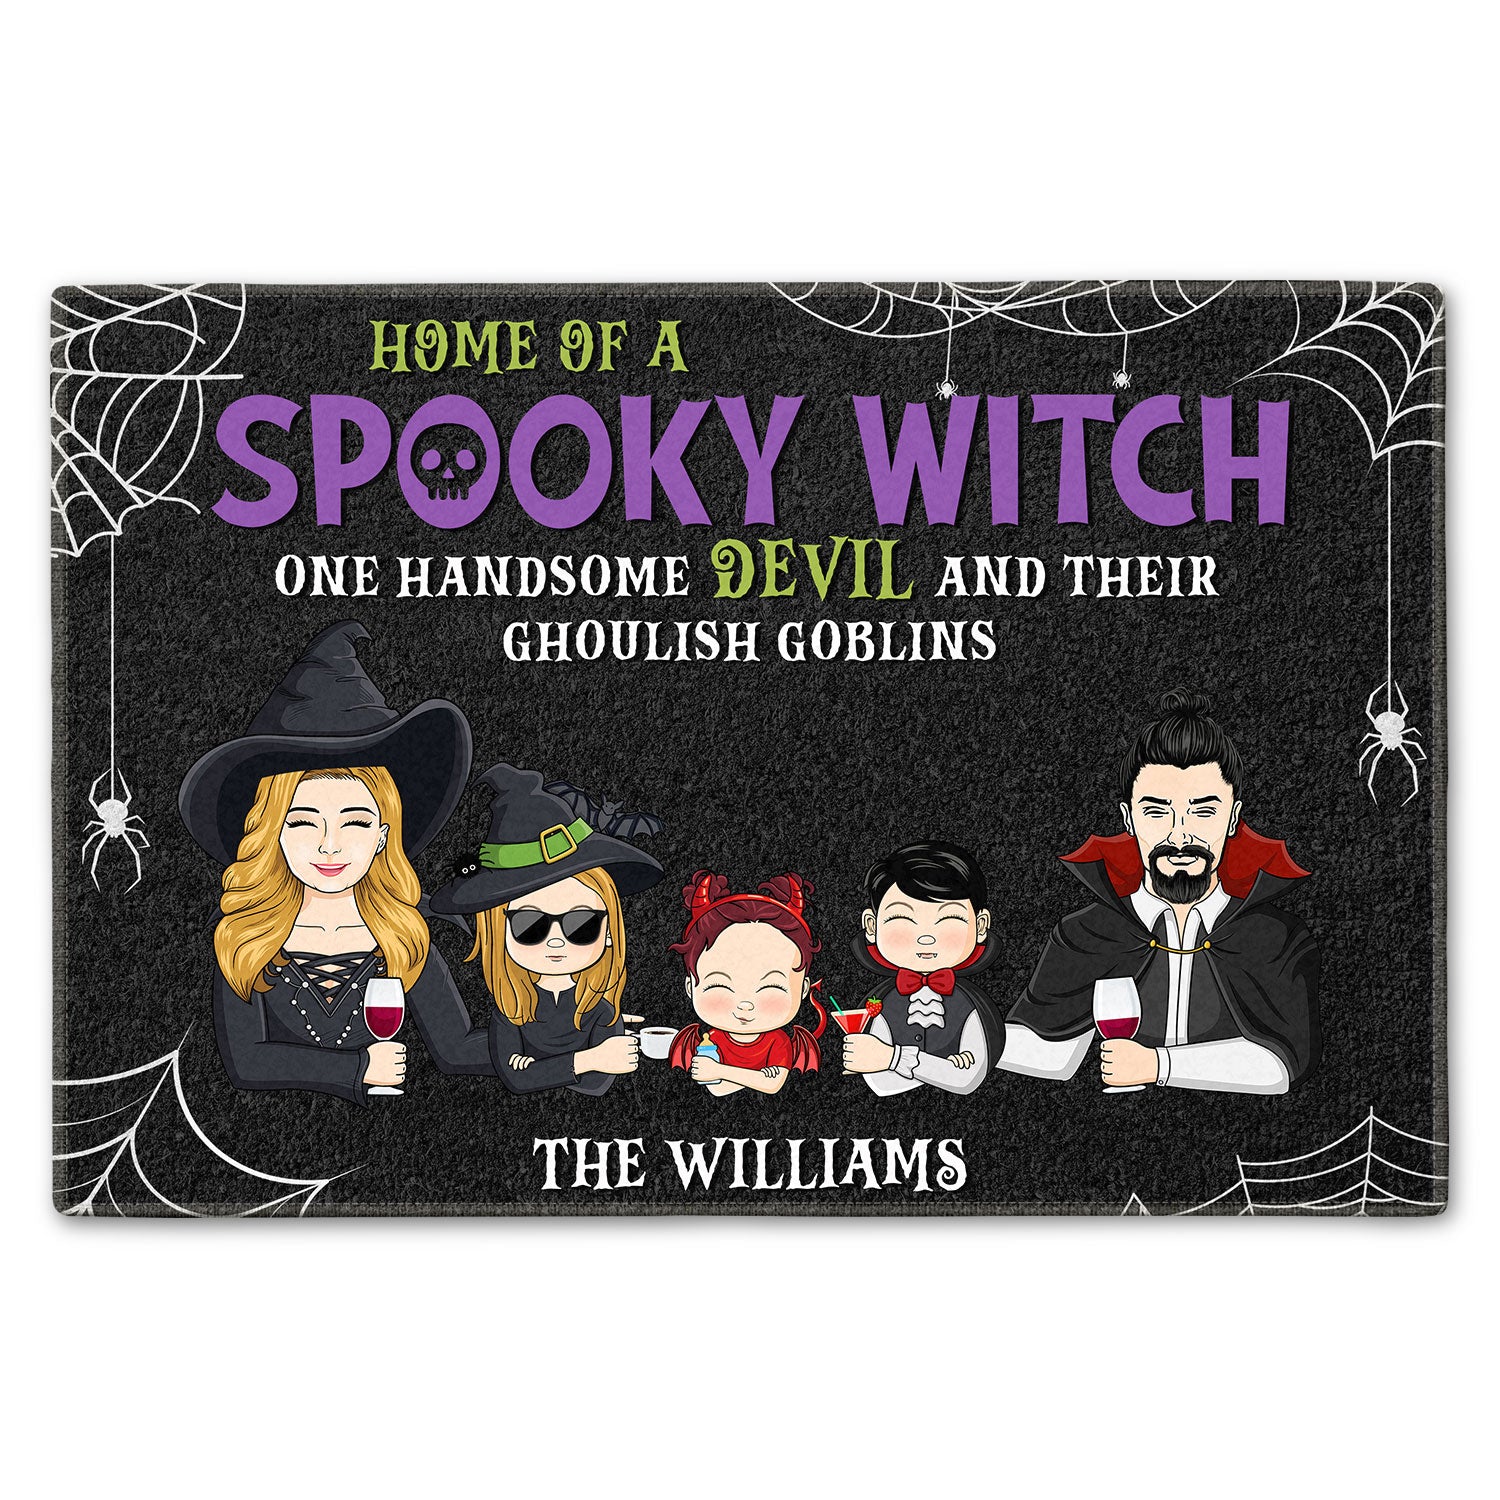 Home Of A Spooky Witch, One Handsome Devil & Their Ghoulish Goblins - Halloween Home Decor Gift For Family - Personalized Doormat